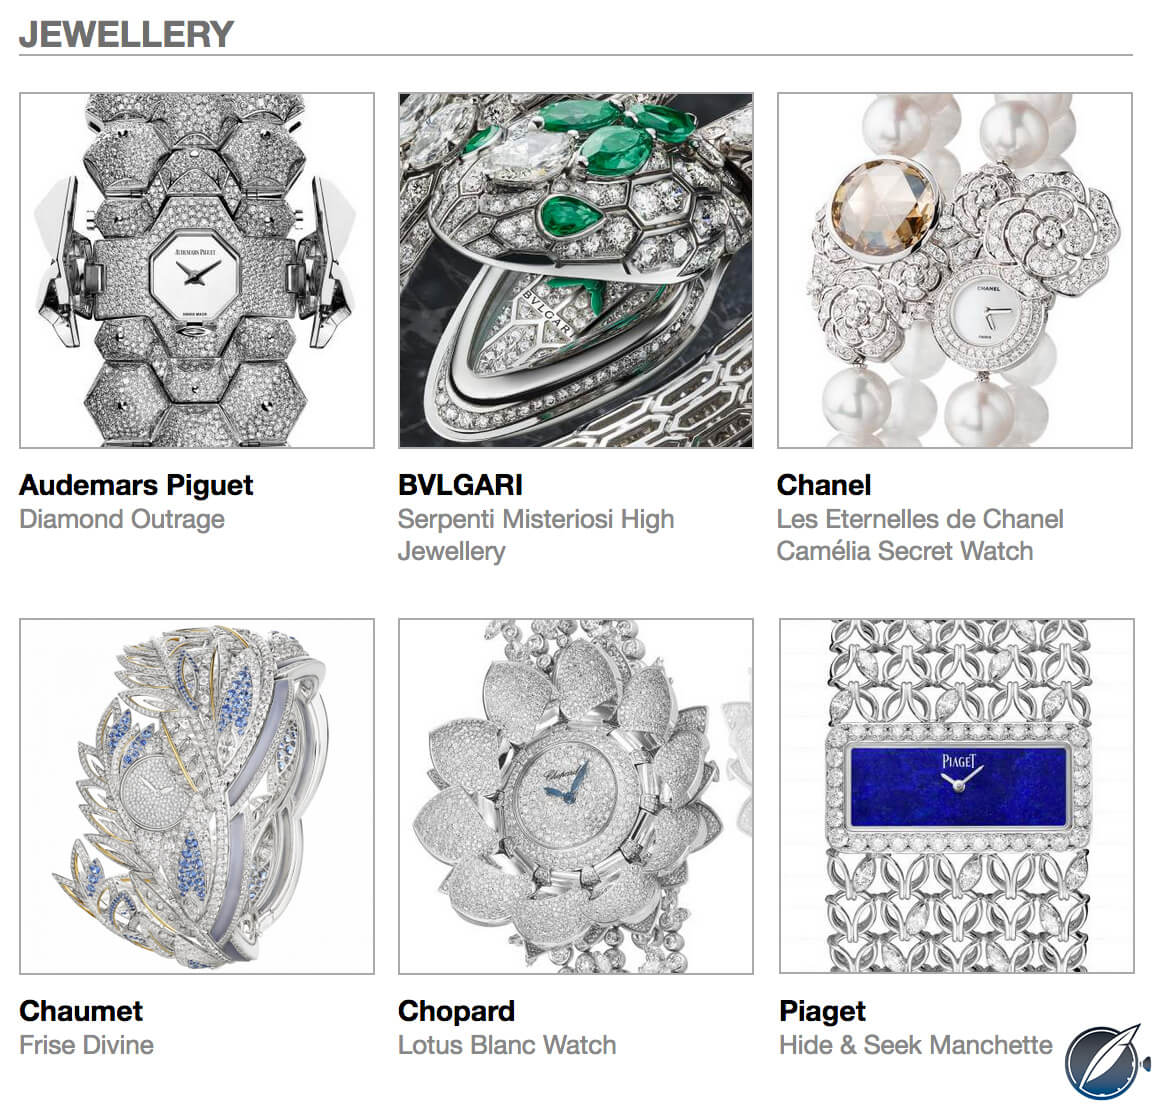 The pre-selected Jewellery watches for the 2017 edition of the GPHG are shown in the image above clockwise from top left: Audemars Piguet Diamond Outrage, Bulgari Serpenti Misteriosi High Jewelry, Chanel Les Eternelles de Chanel Camélia Secret Watch, Chaumet Frise Divine, Chopard Lotus Blanc, and Piaget Hide & Seek Manchette.